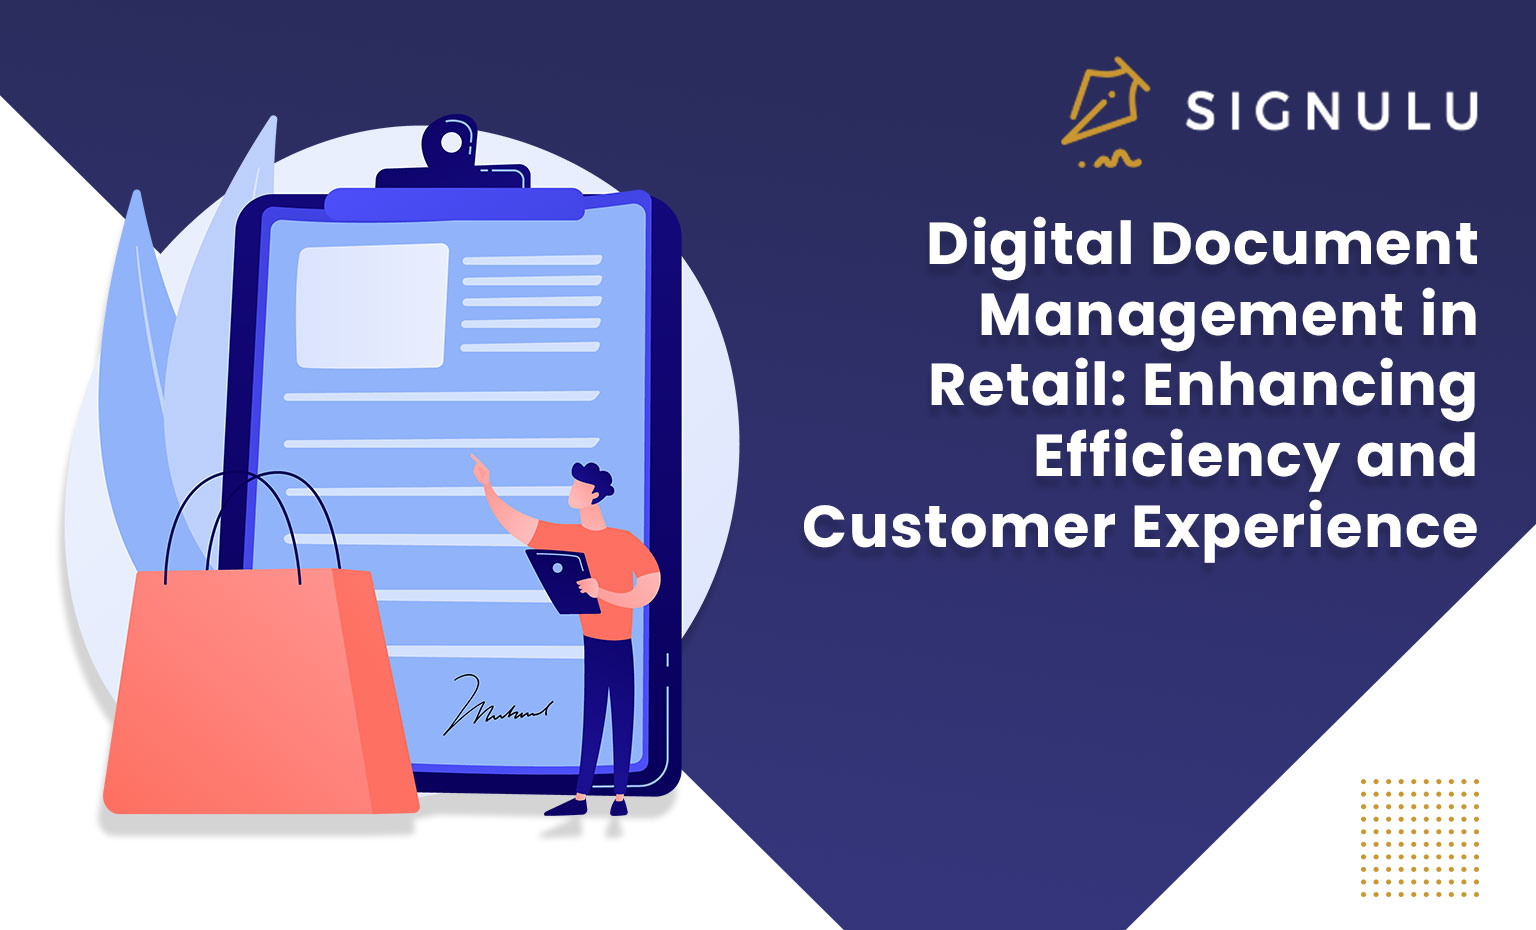 Digital Document Management in Retail: Enhancing Efficiency and Customer Experience